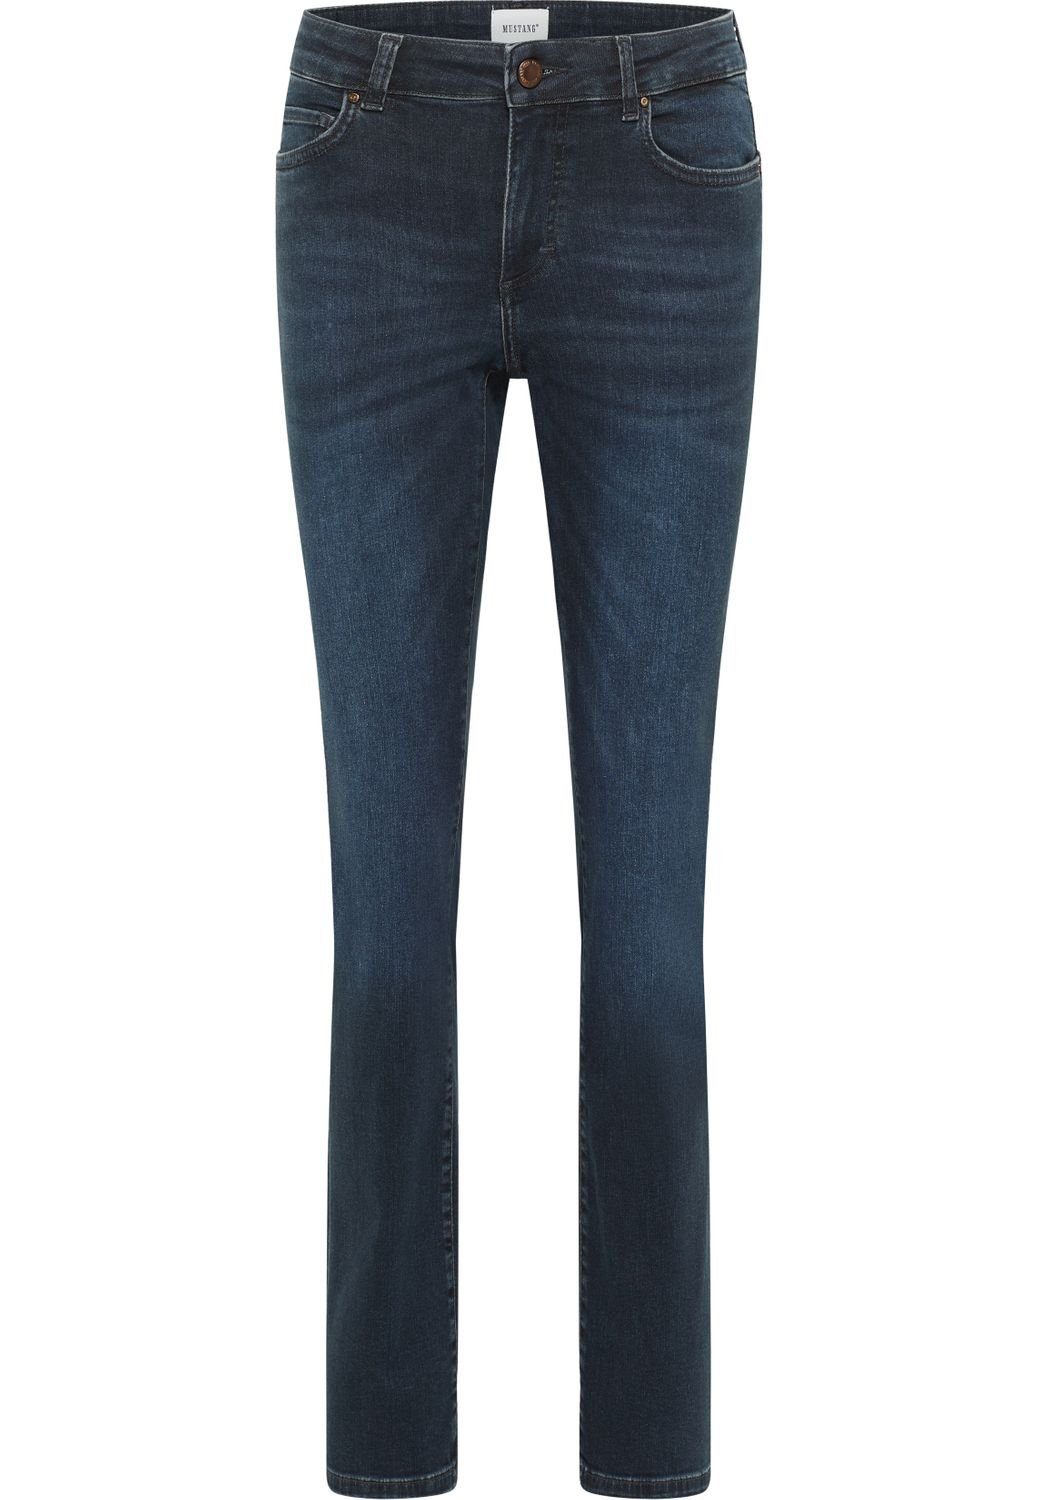 MUSTANG Relax-fit-Jeans CROSBY mit Stretch